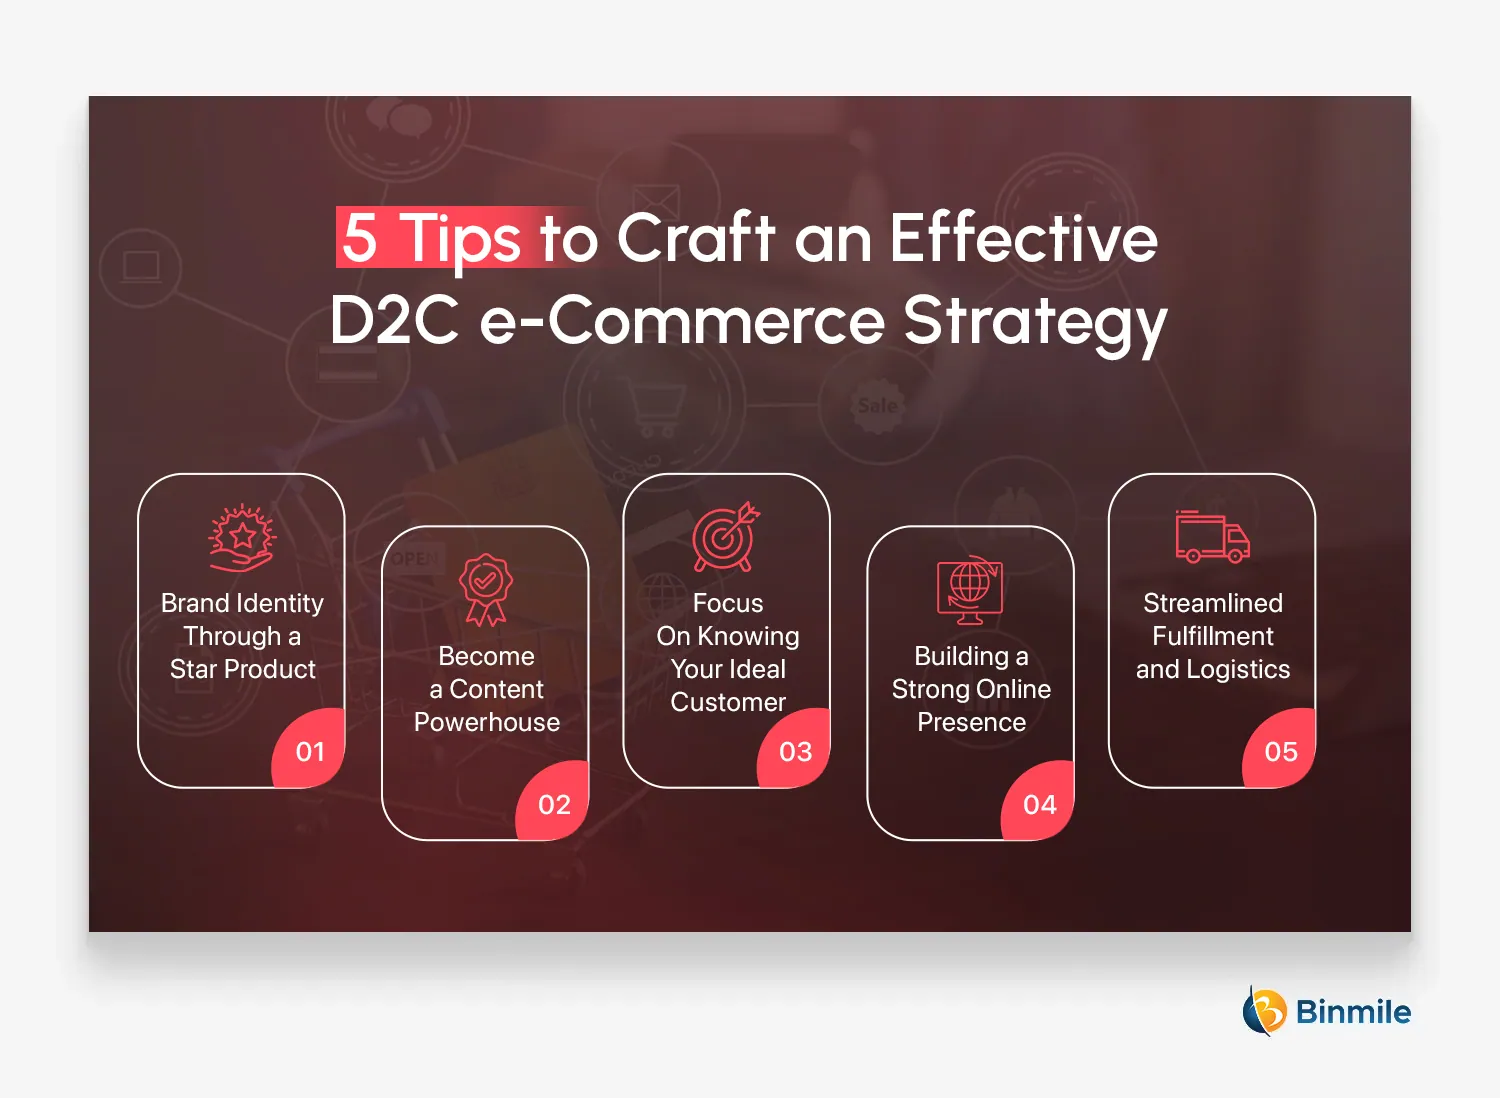 5 Tips to Craft an Effective D2C e-Commerce Strategy | Binmile